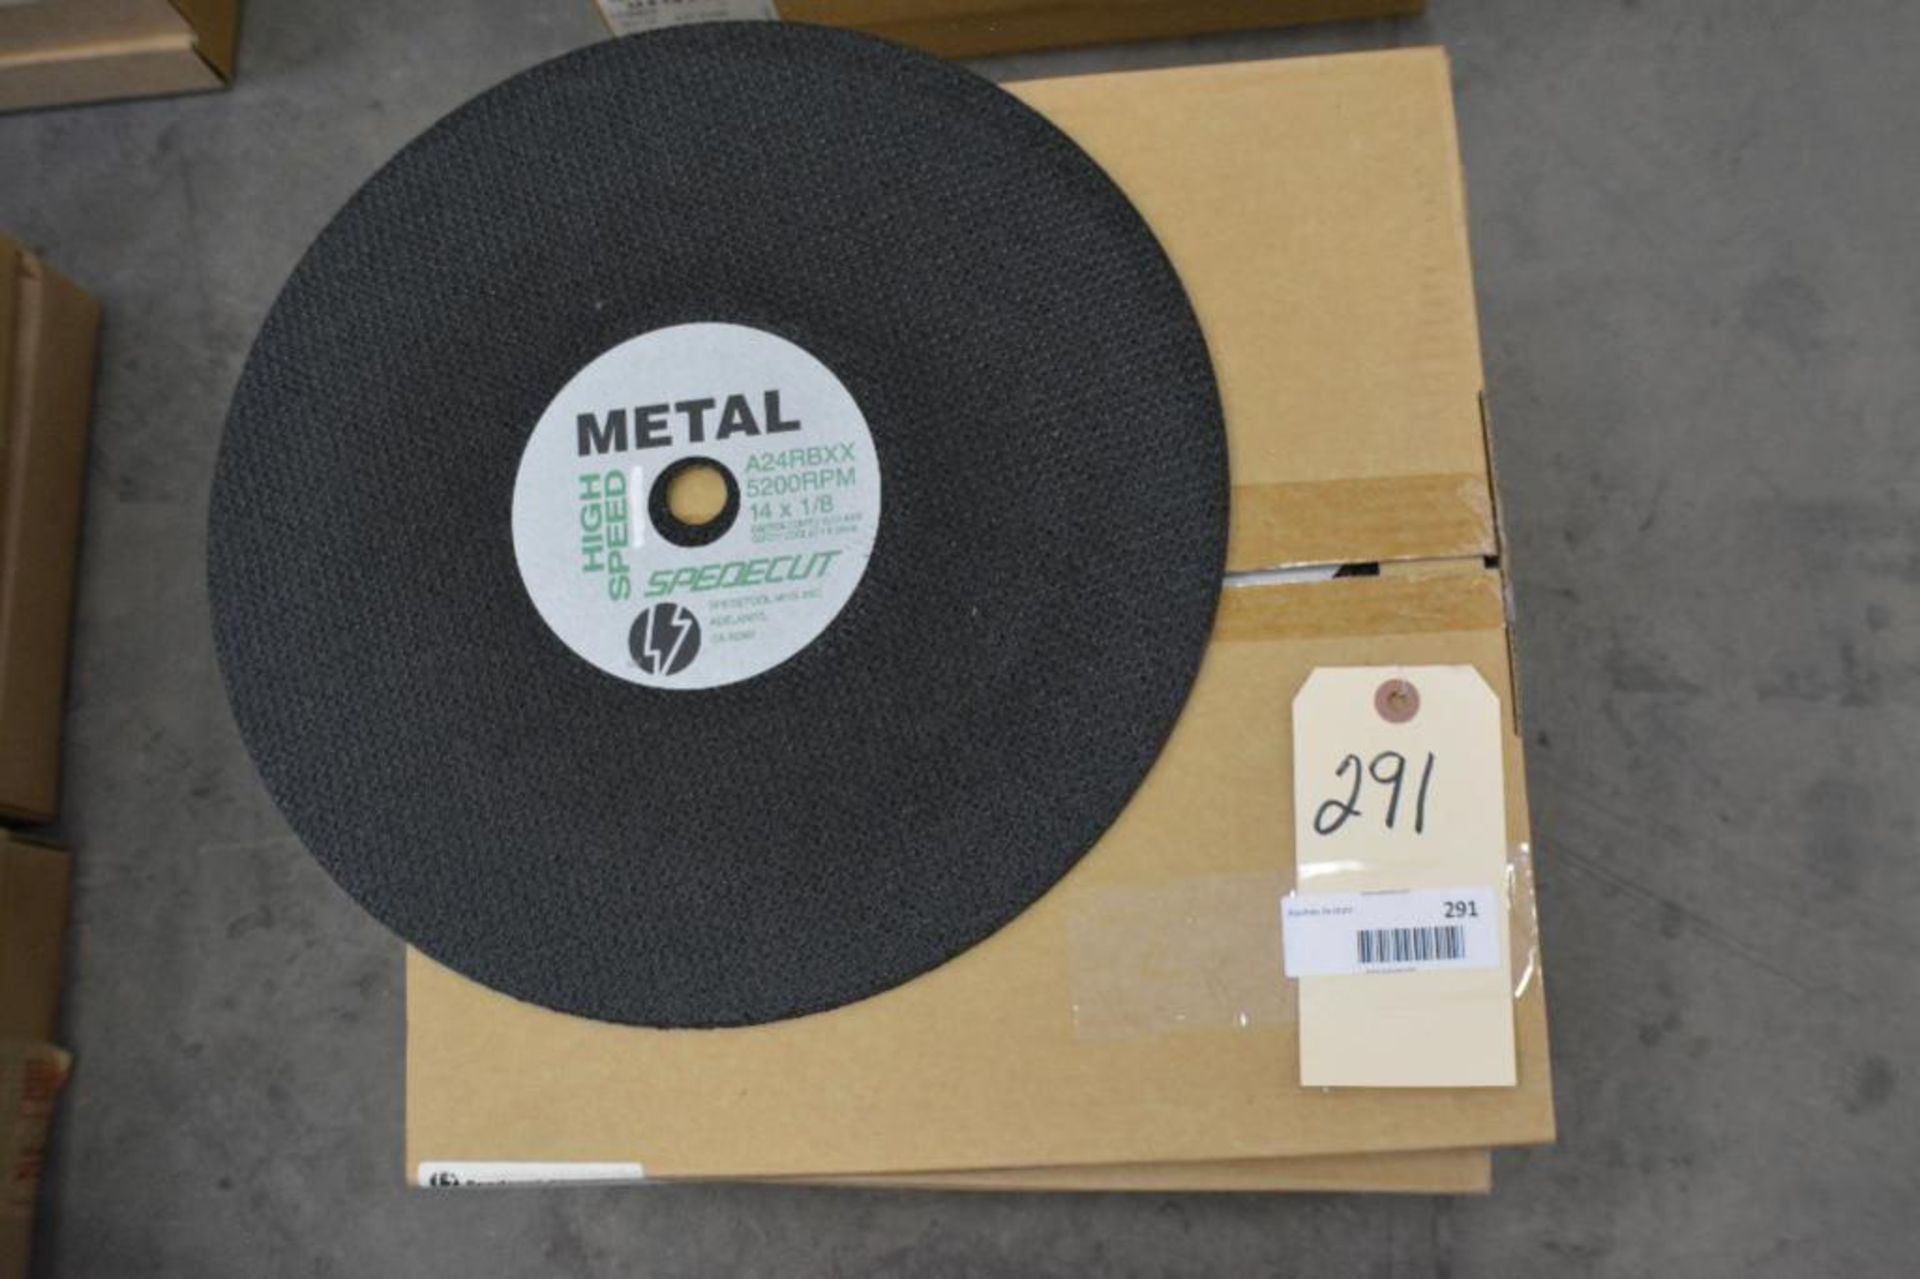 Speedcut Metal Cutting Disc. Size: 14 x 1/8 x 20mm Use on portable High Speed Gas or Electric Cut of